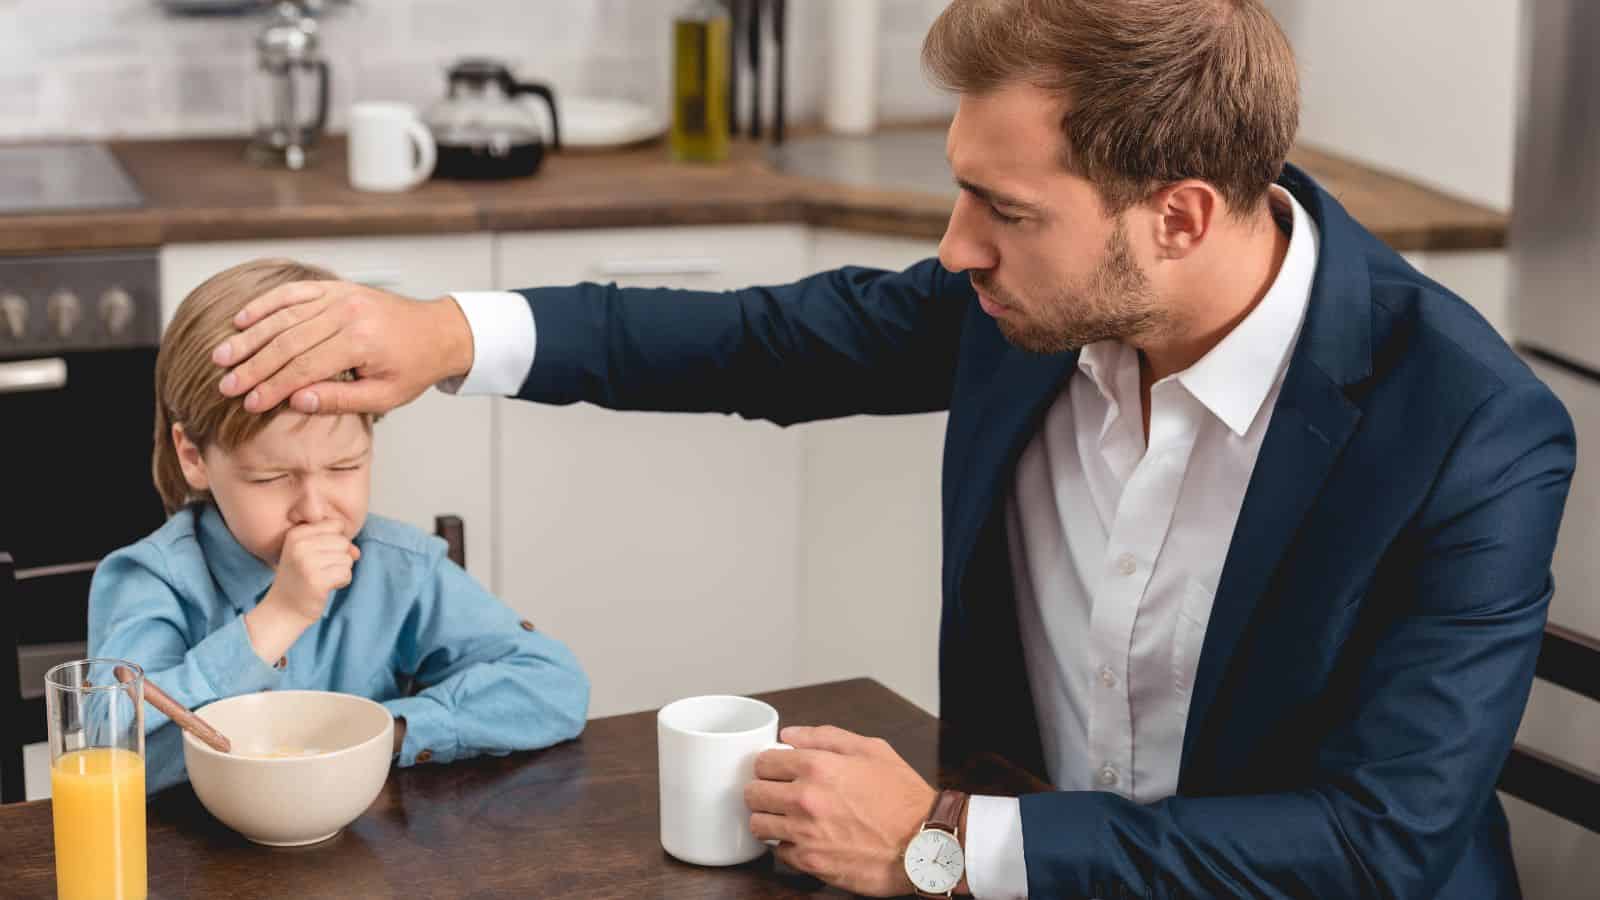 Young father checking temperature of son with hand during breakfast